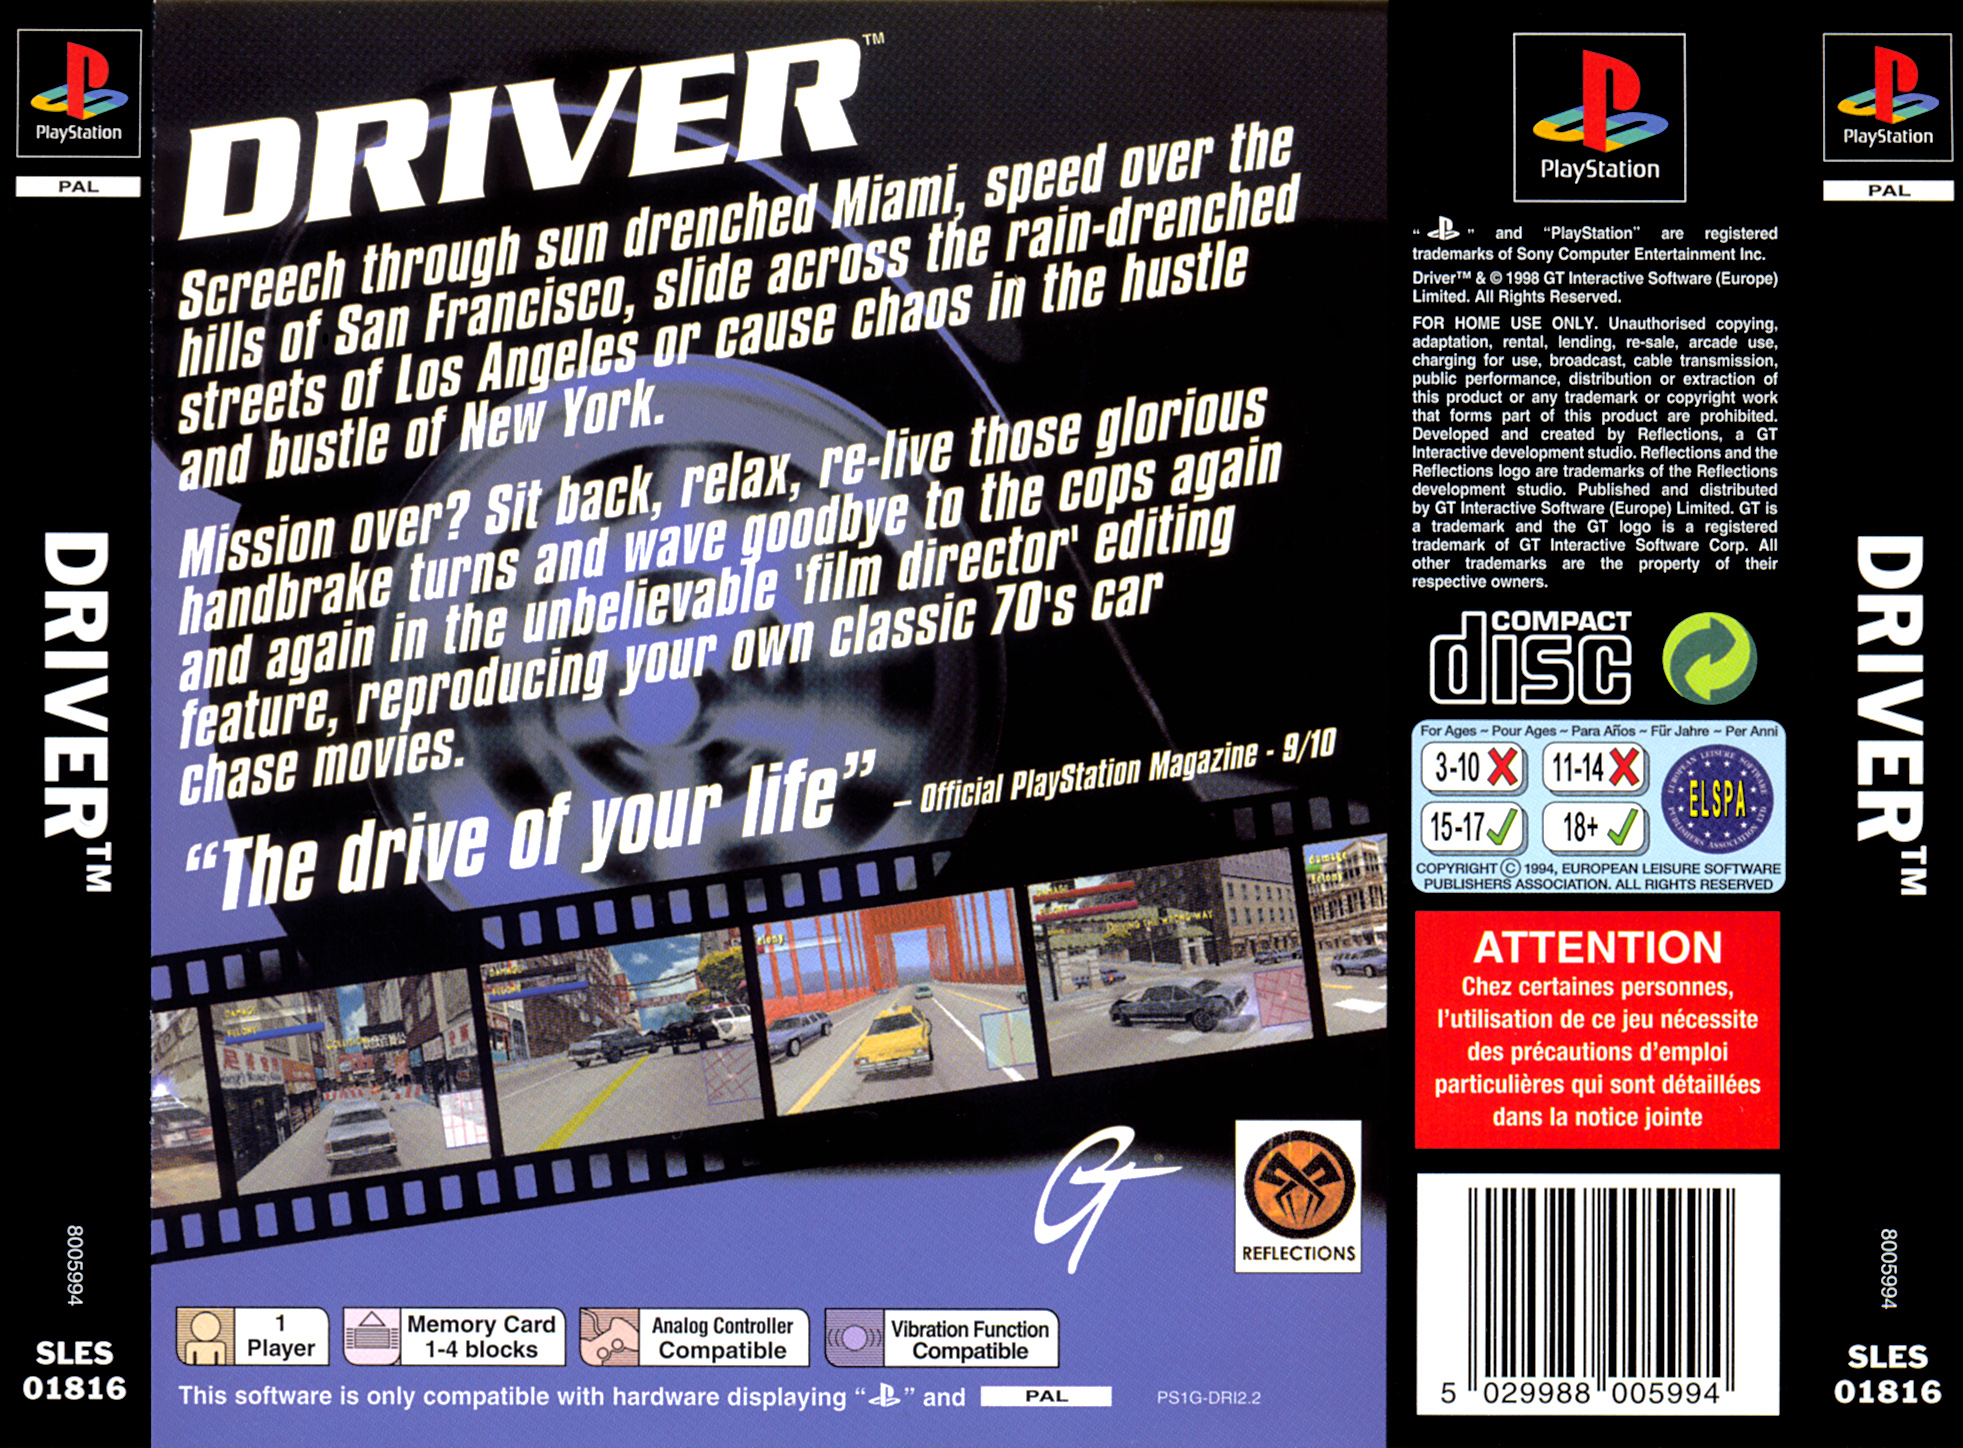 Driver__[SLES-01816] ROM Download - Sony PSX/PlayStation 1(PSX)